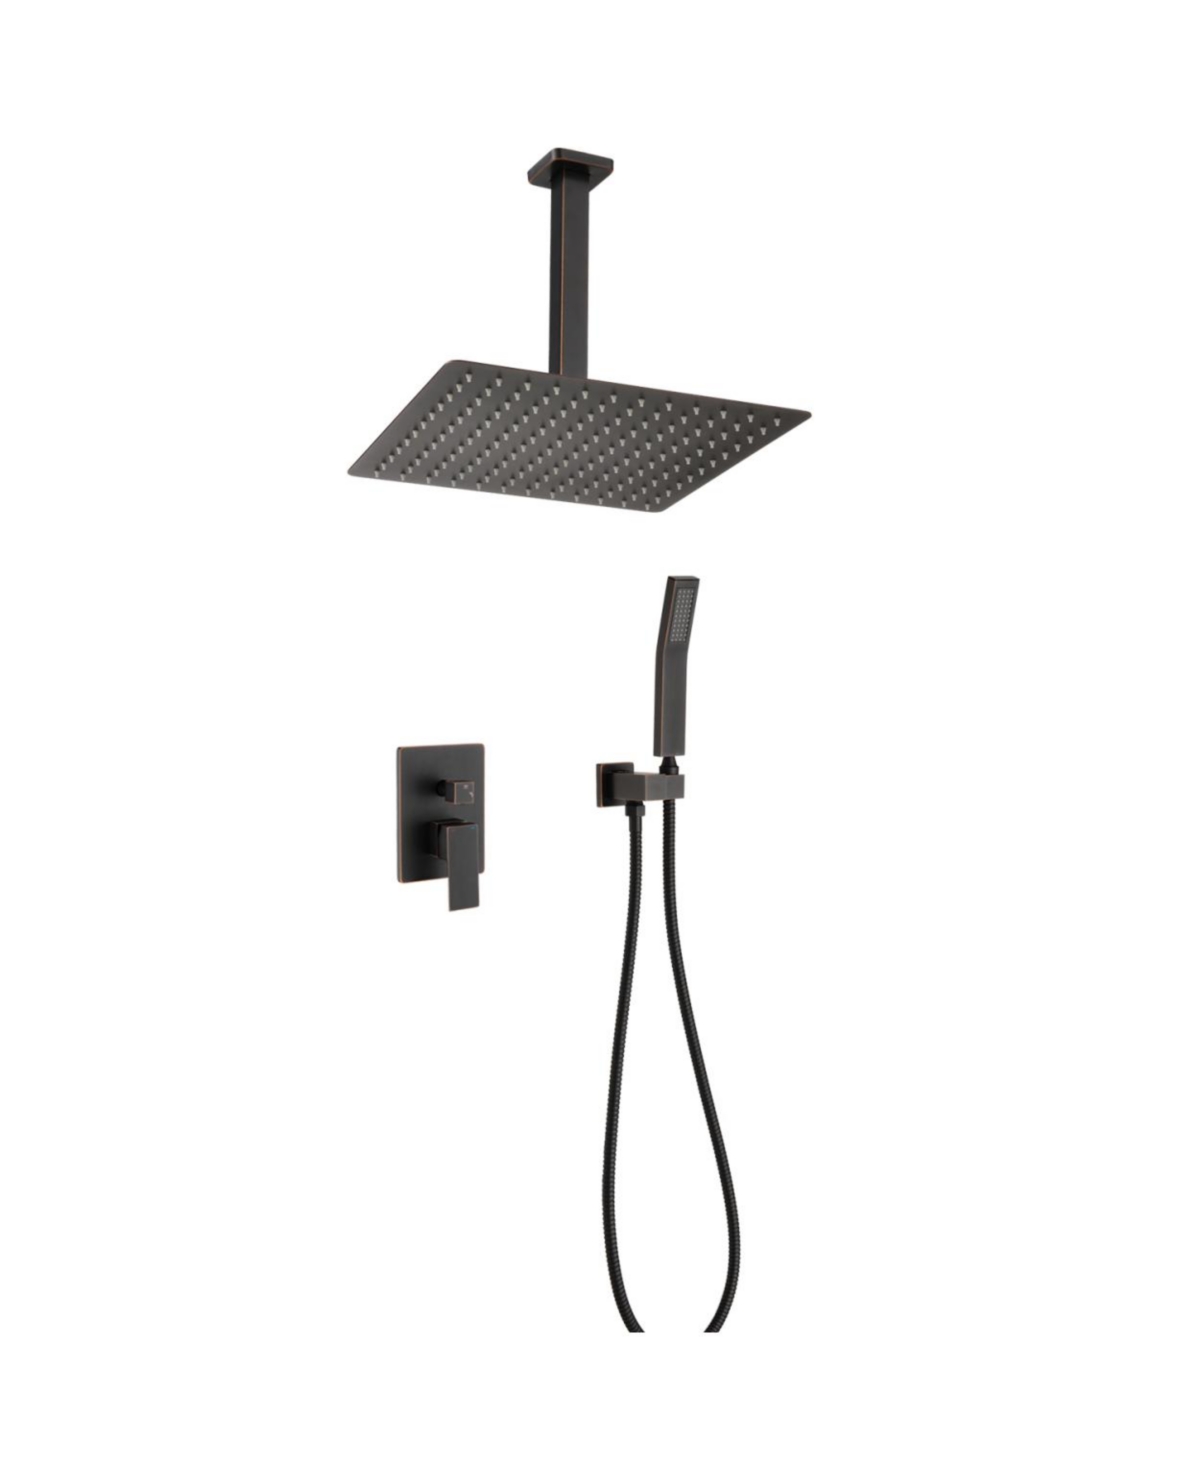 Ceiling Mounted Shower System Combo Set With Handheld And 10" Shower Head - Brown